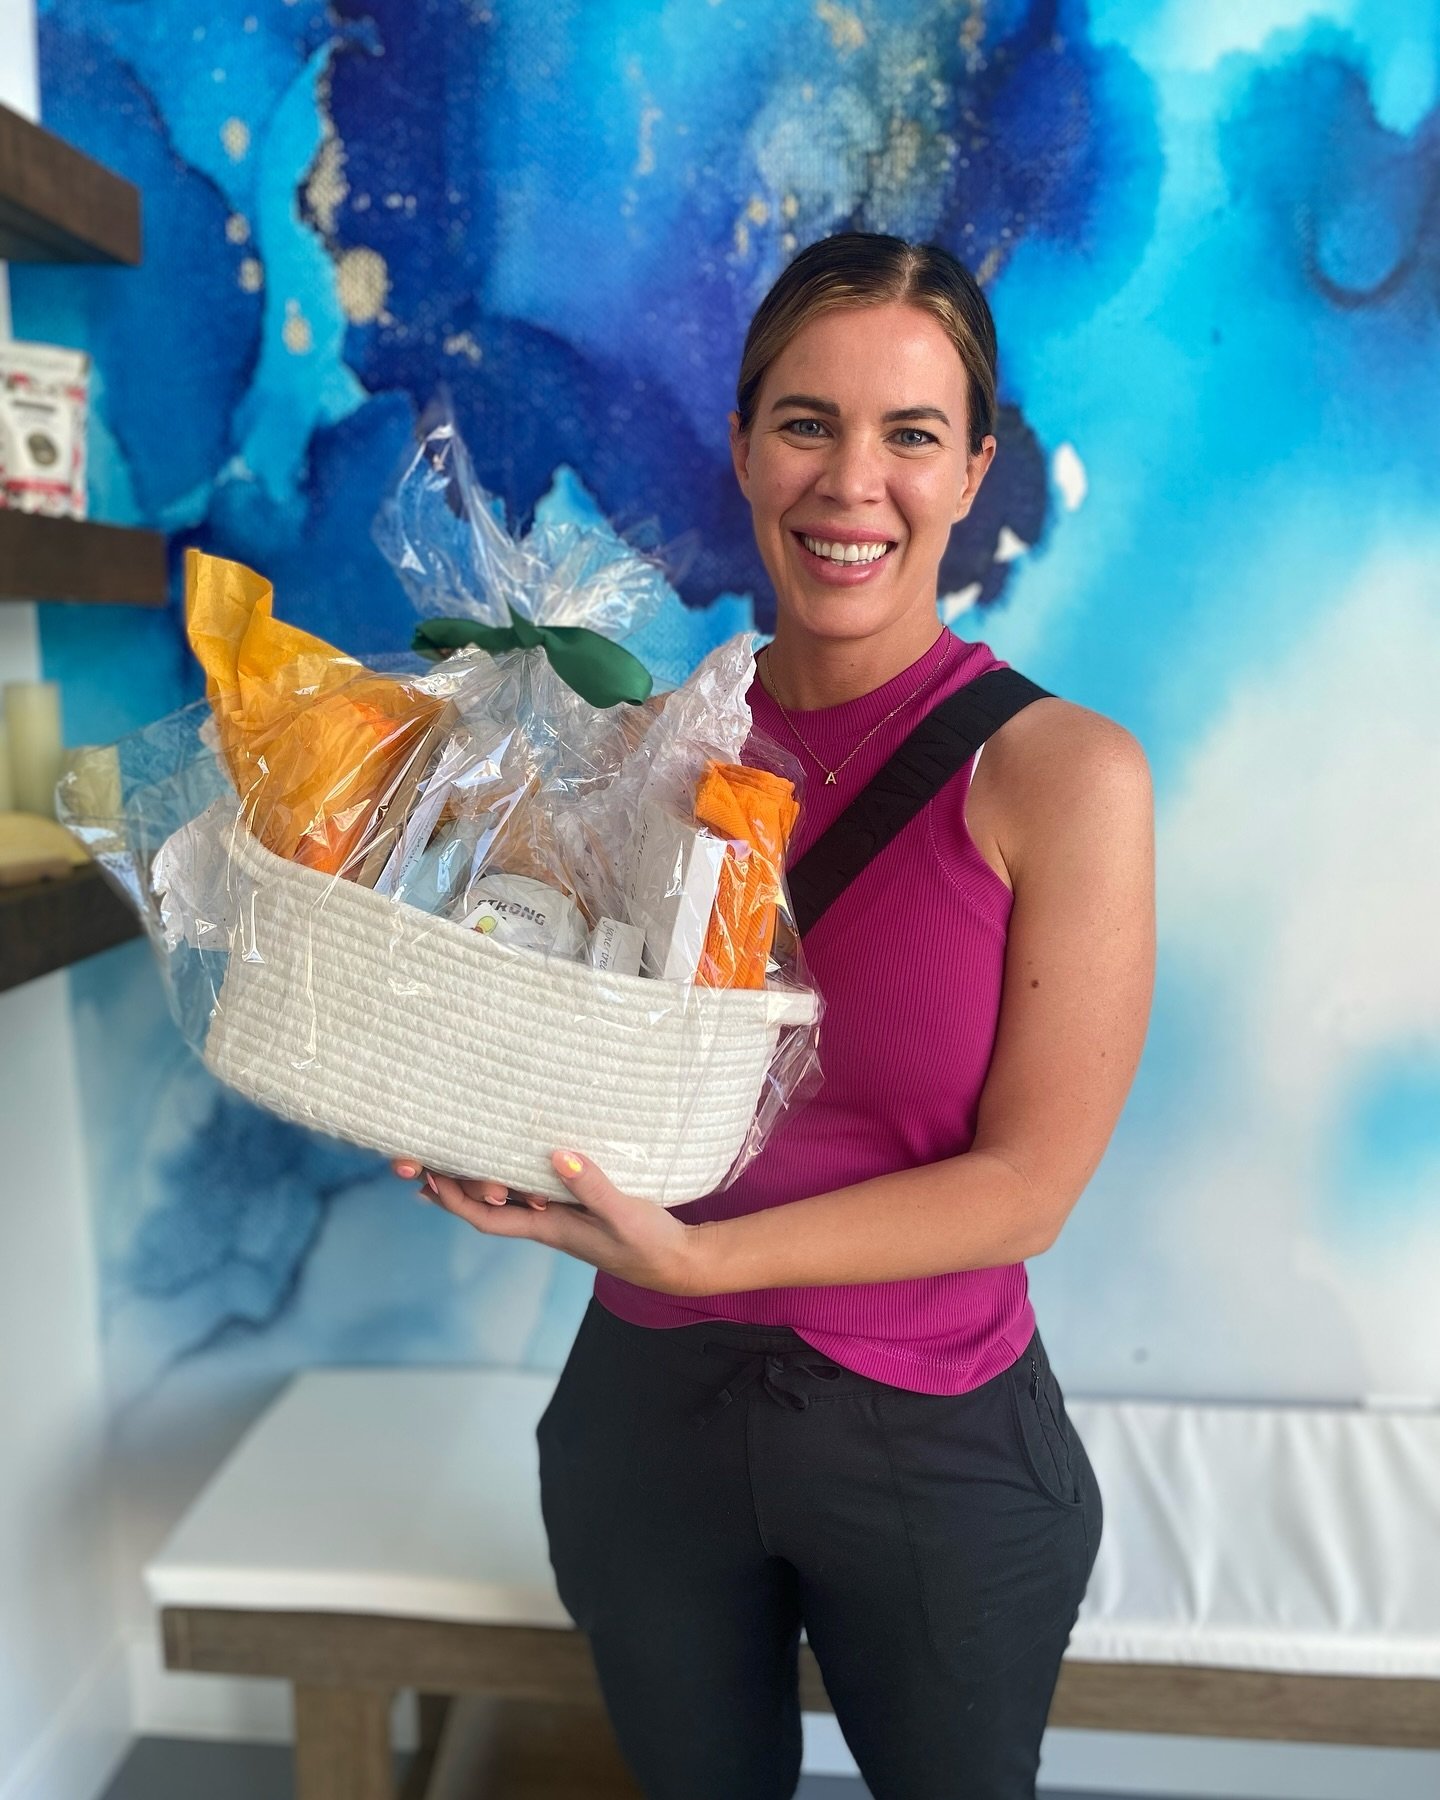 This beautiful Mama picked up her gift basket today! Congratulations on winning our Ultimate Mother&rsquo;s Day Giveaway, @higgs2121 - we can&rsquo;t wait to spoil and pamper you! @modern.medspa @otfsojo @lifeaveda @radiantwaxing_utah @primeivthedist